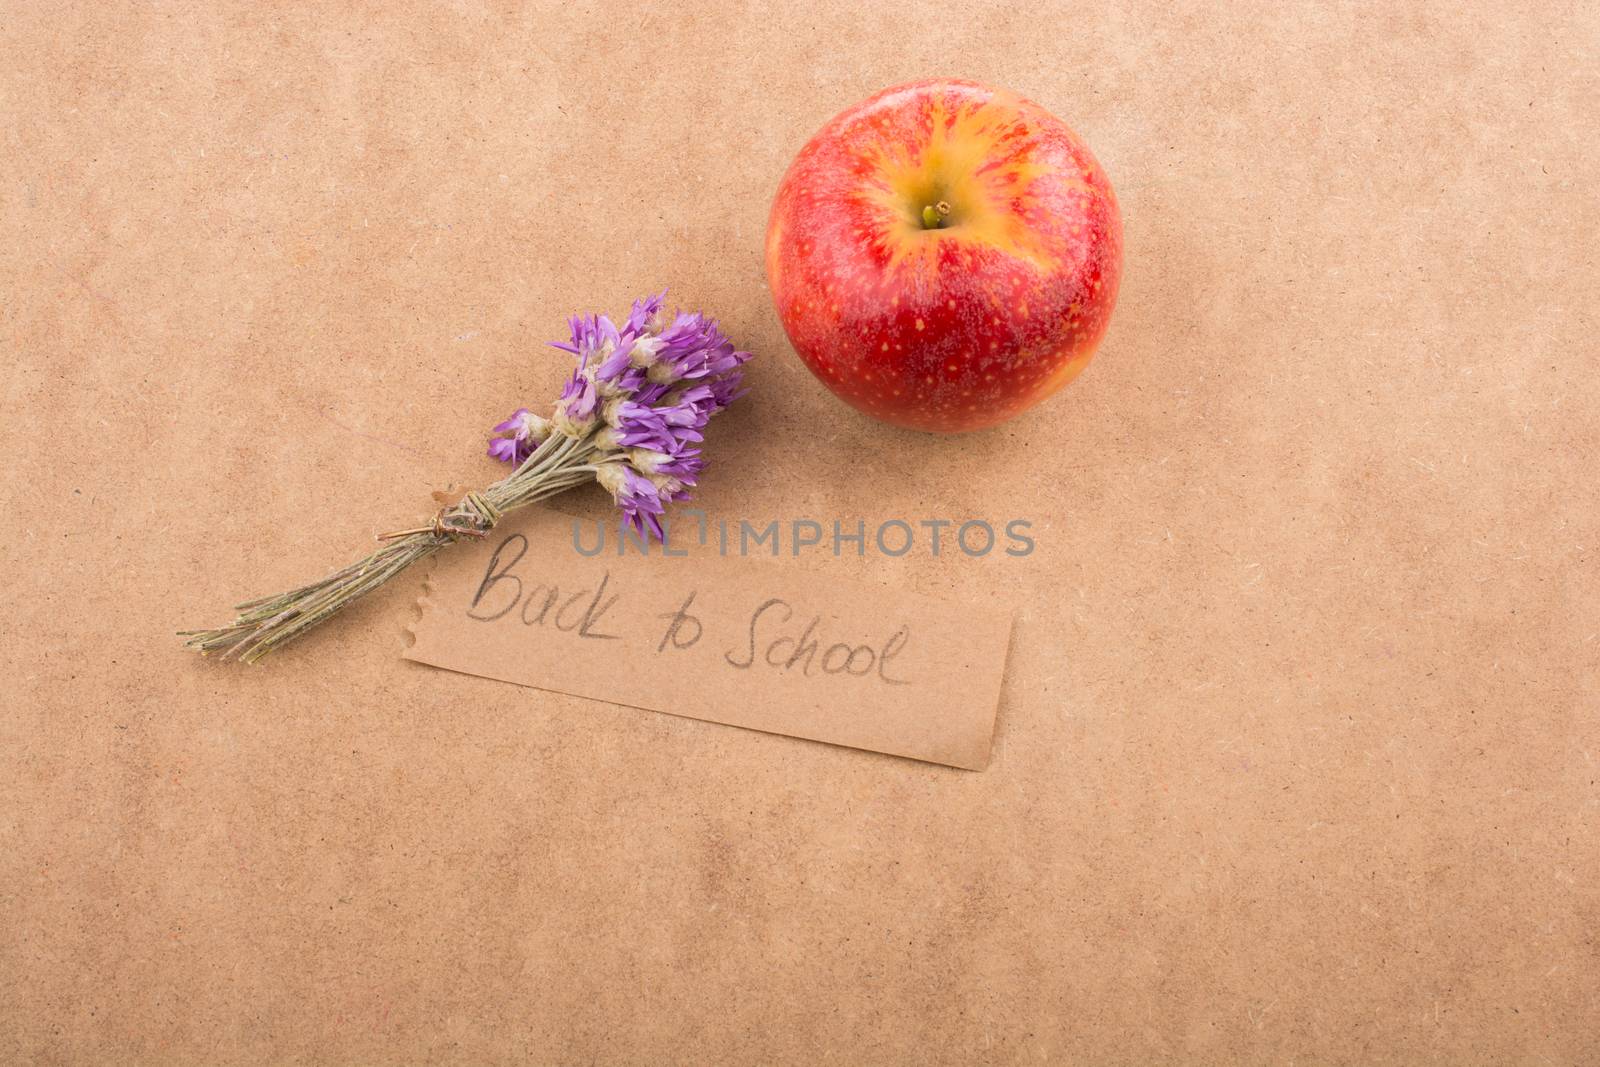 Back to school lettering with apple and flower  by berkay